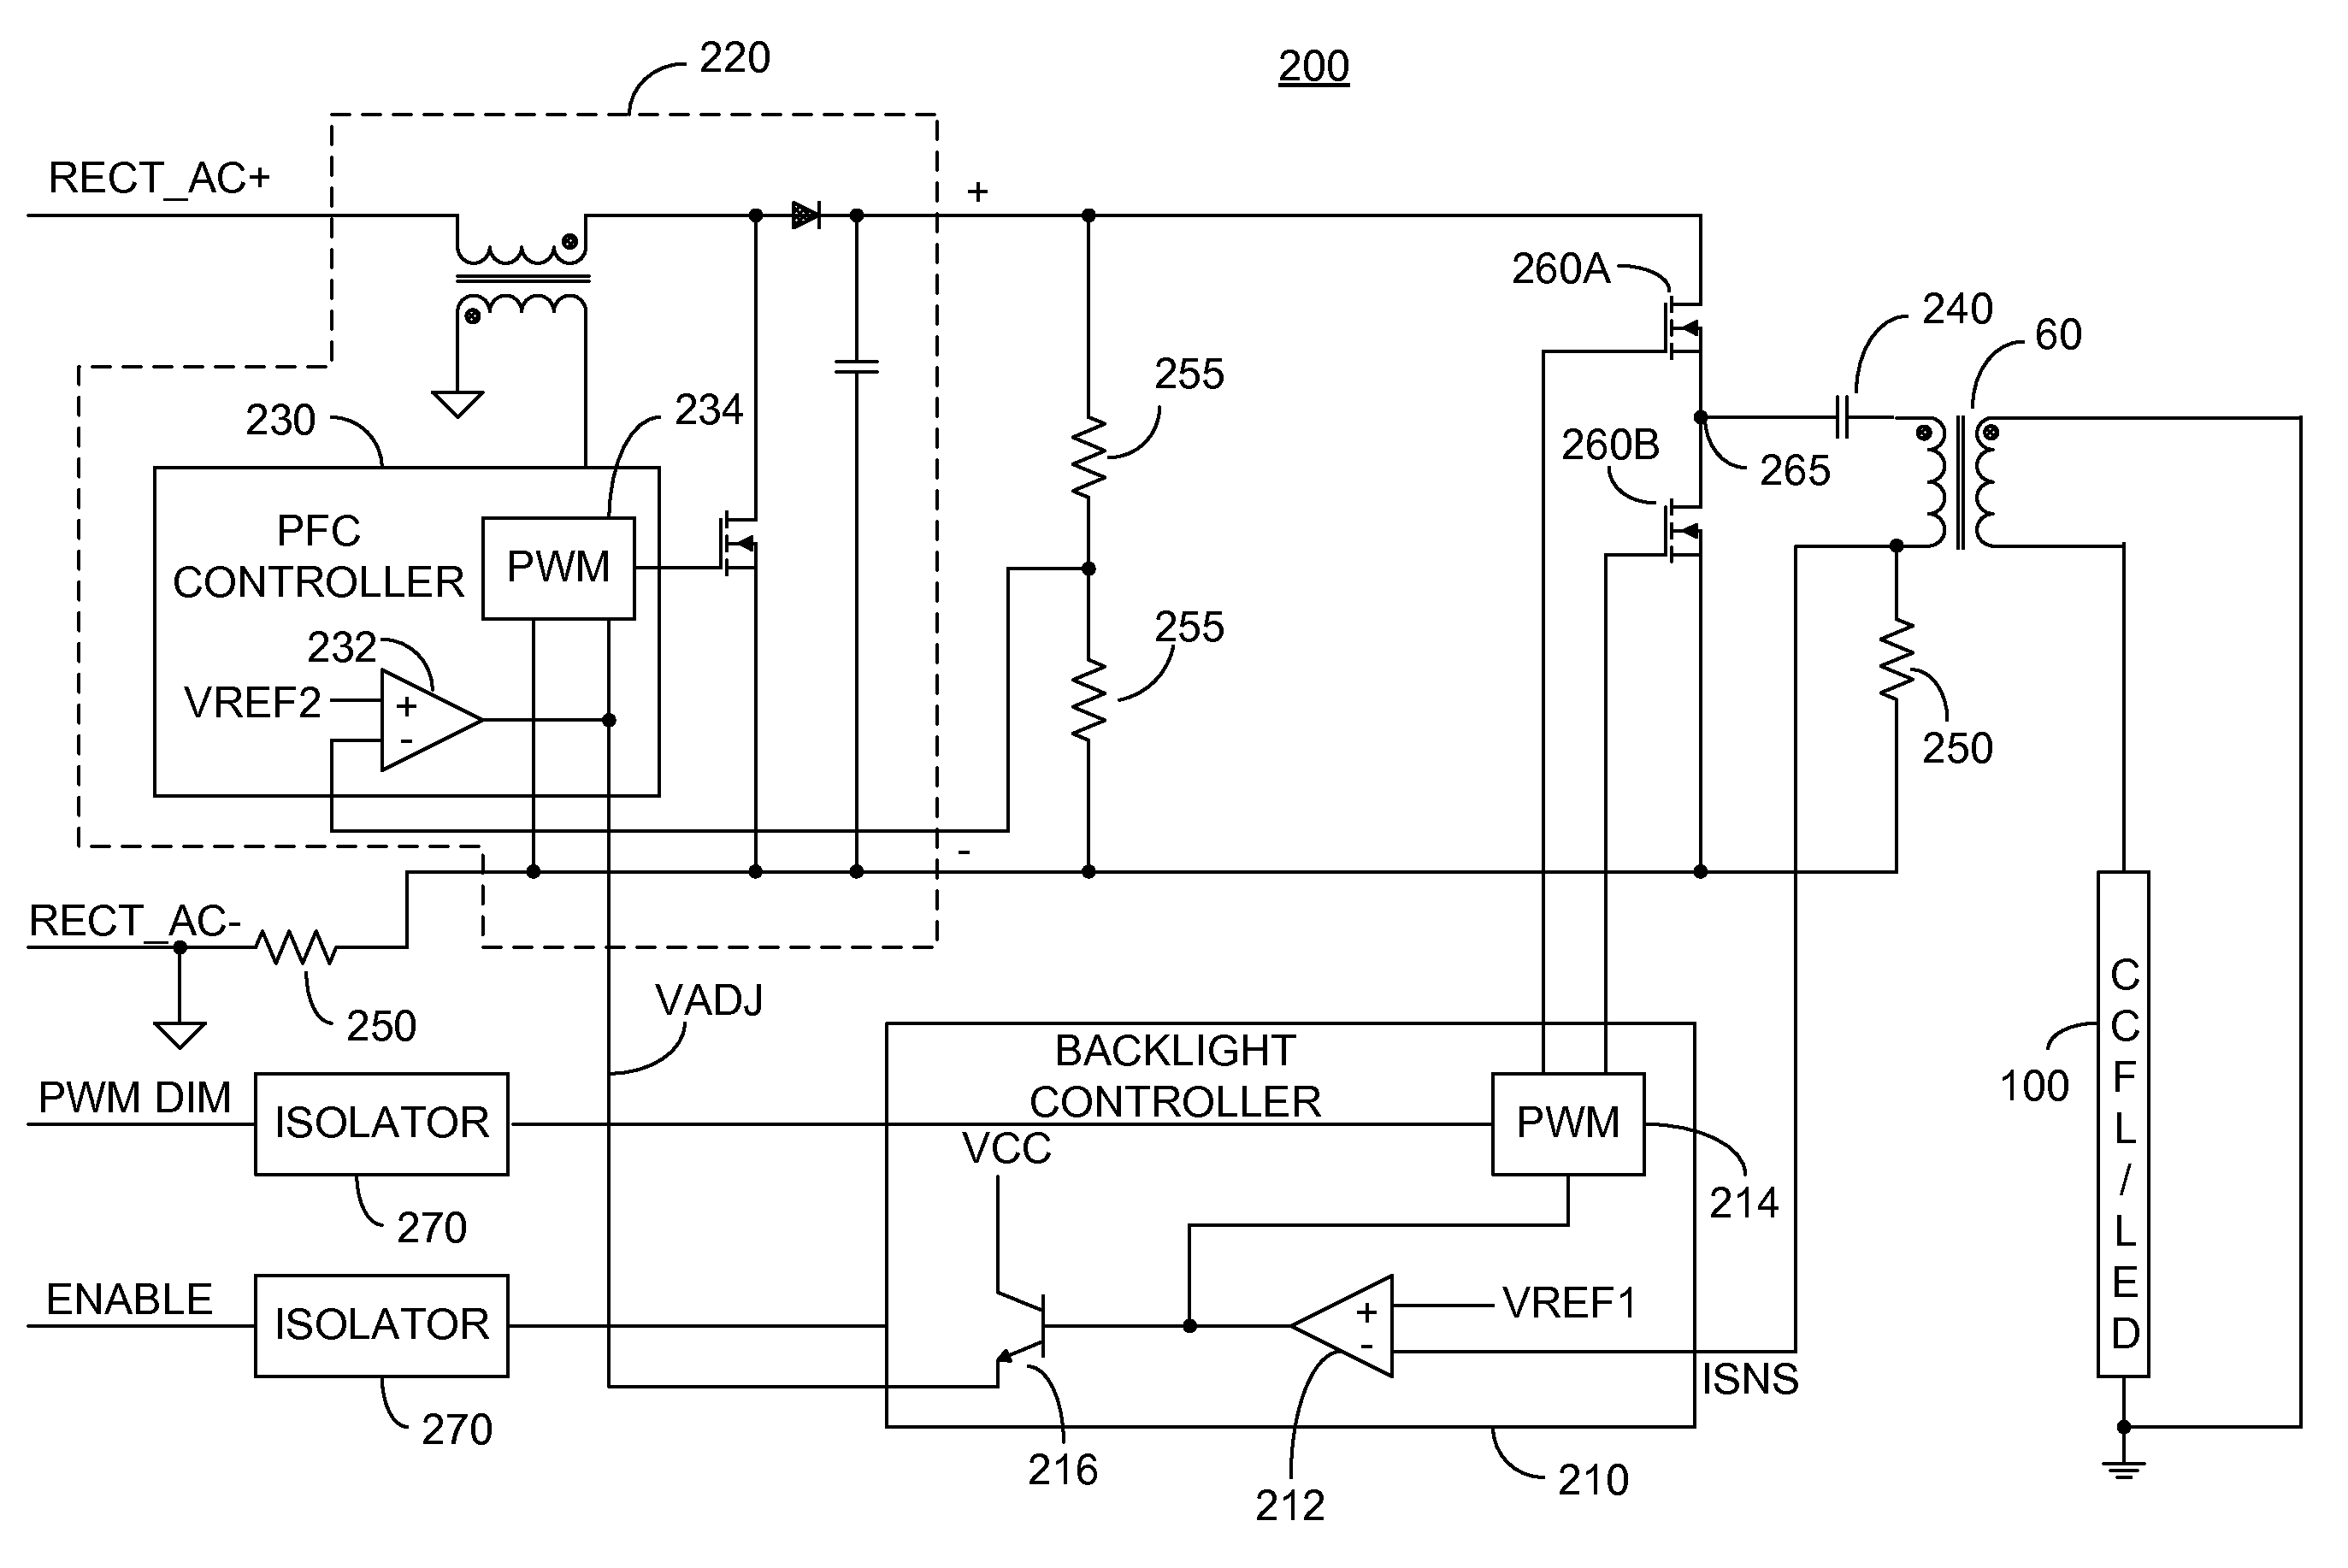 Integrated backlight control system